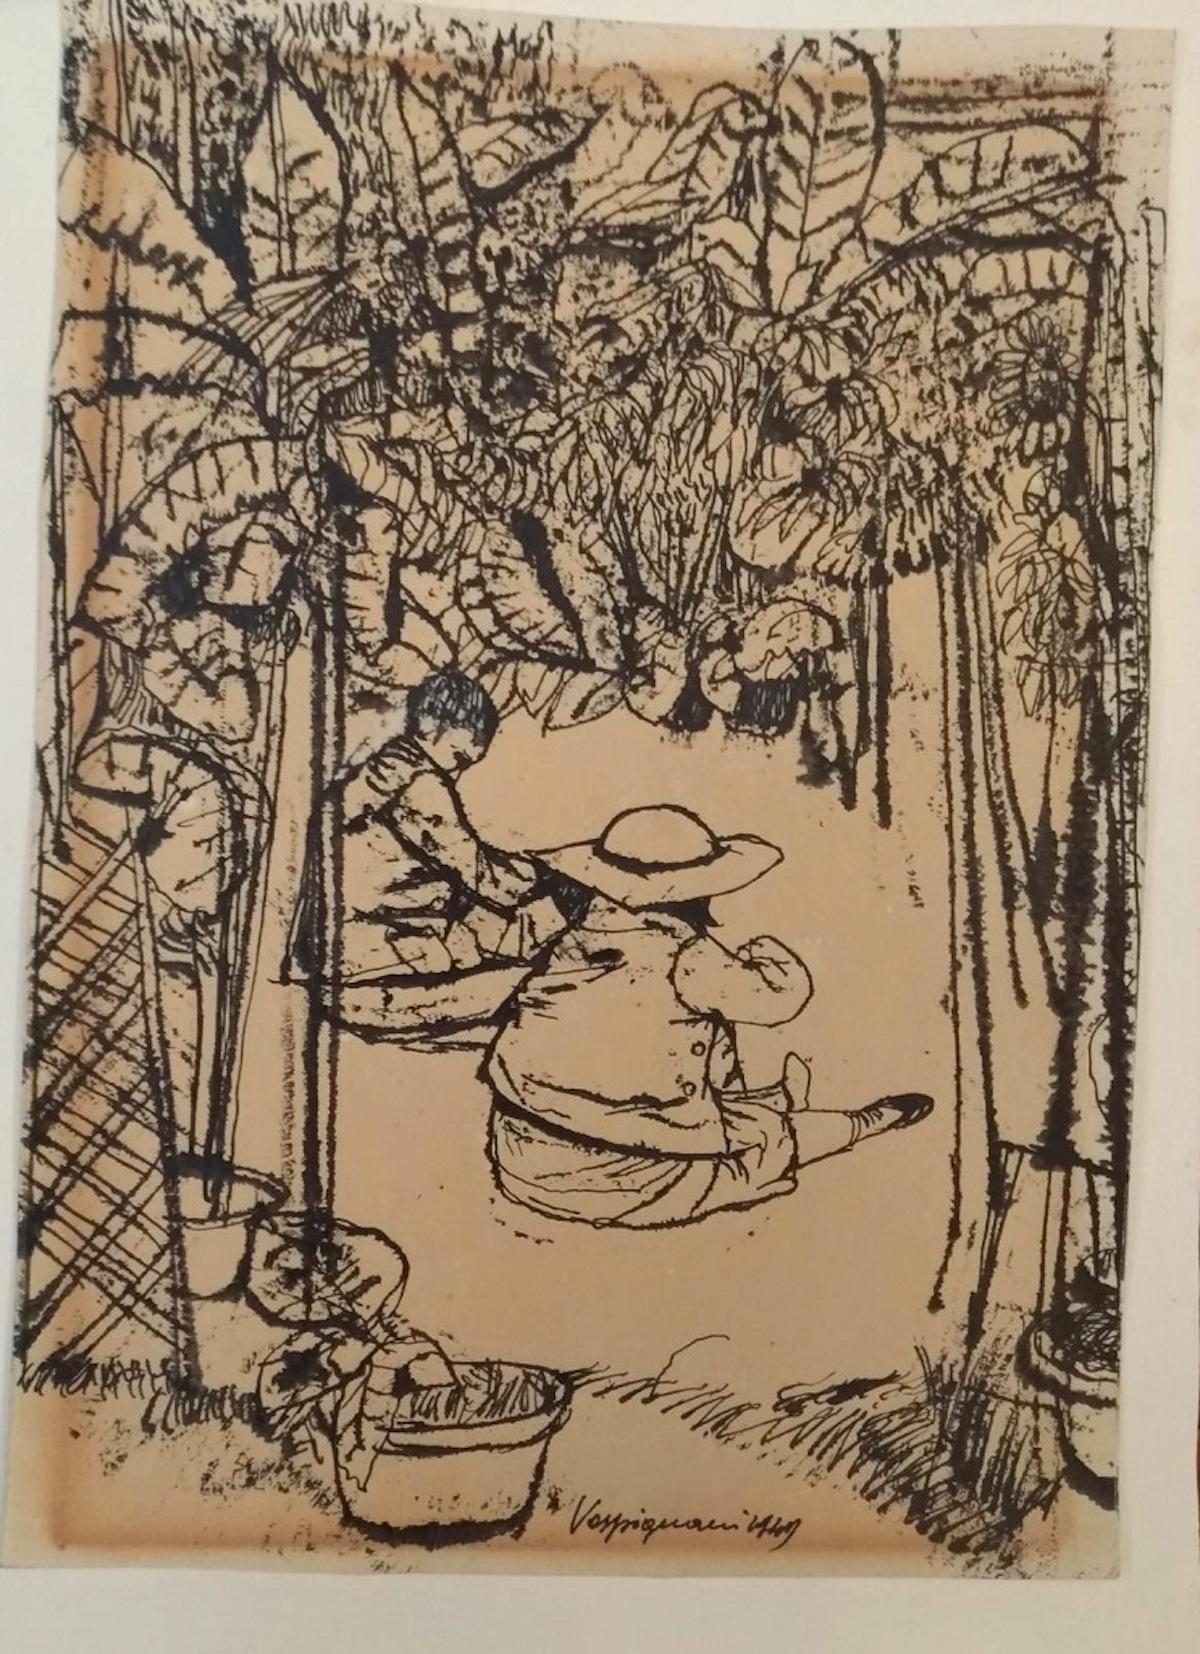 Children in the Garden - China Ink Drawing by Renzo Vespignani - 1949